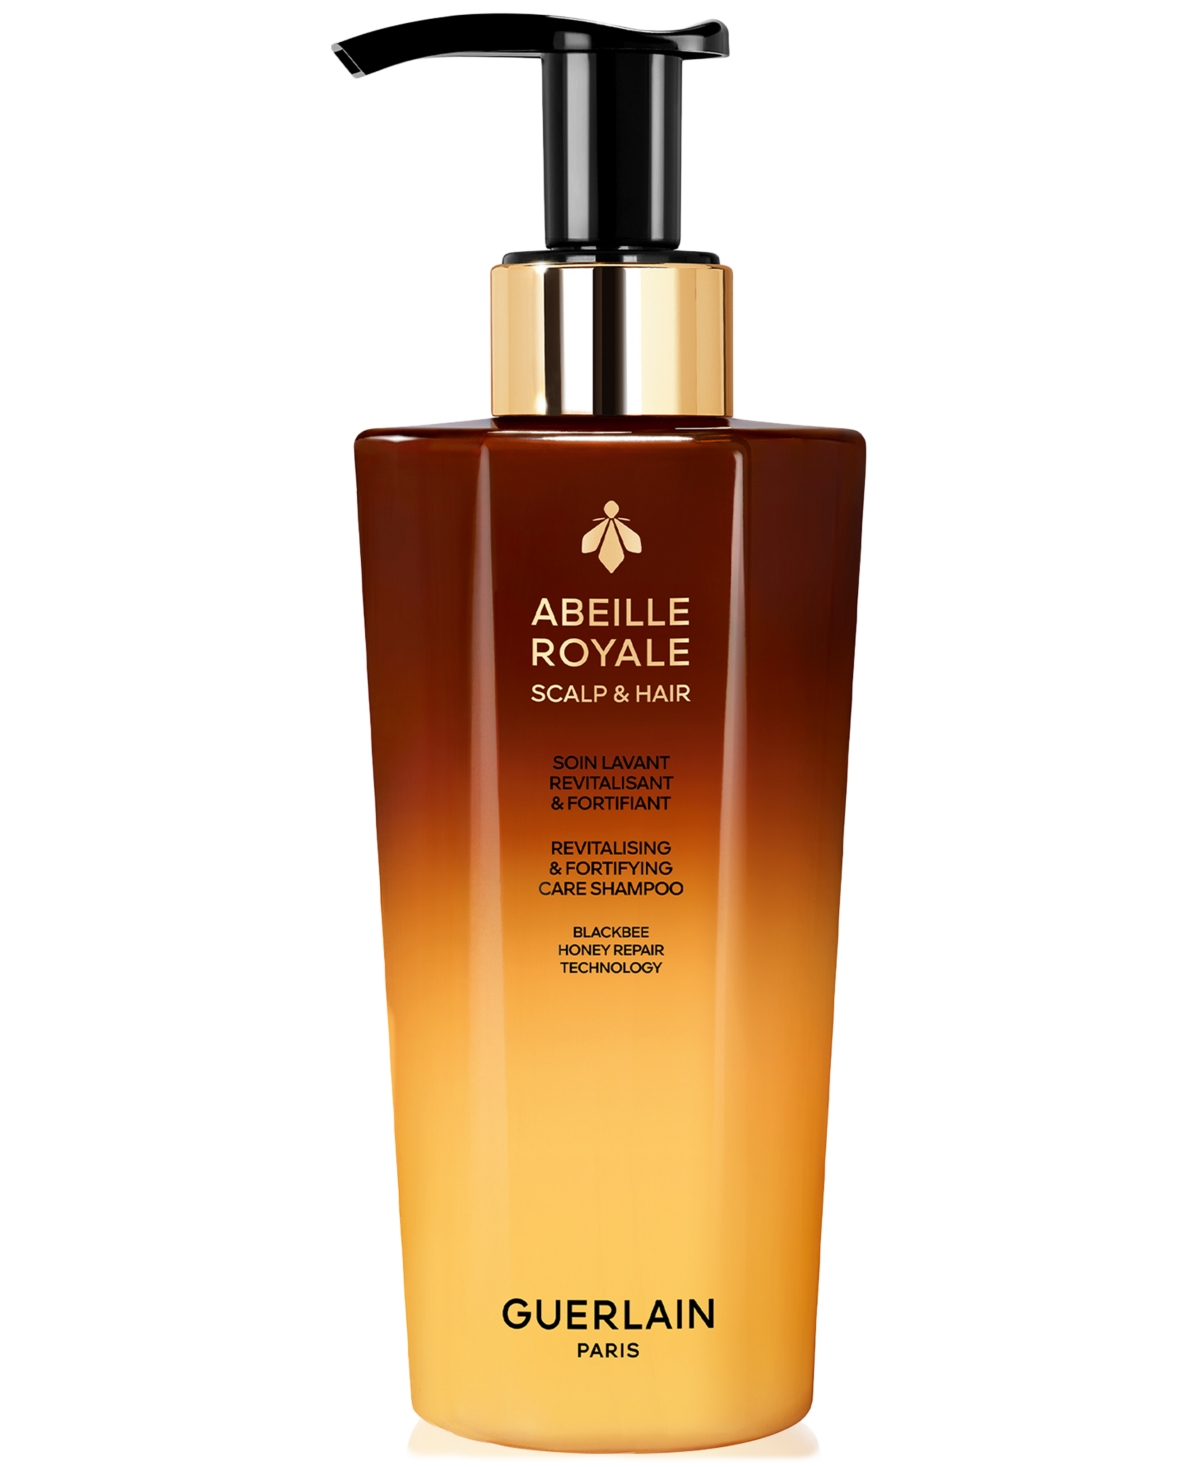 Abeille Royale Scalp & Hair Revitalising & Fortifying Care Shampoo - N/a